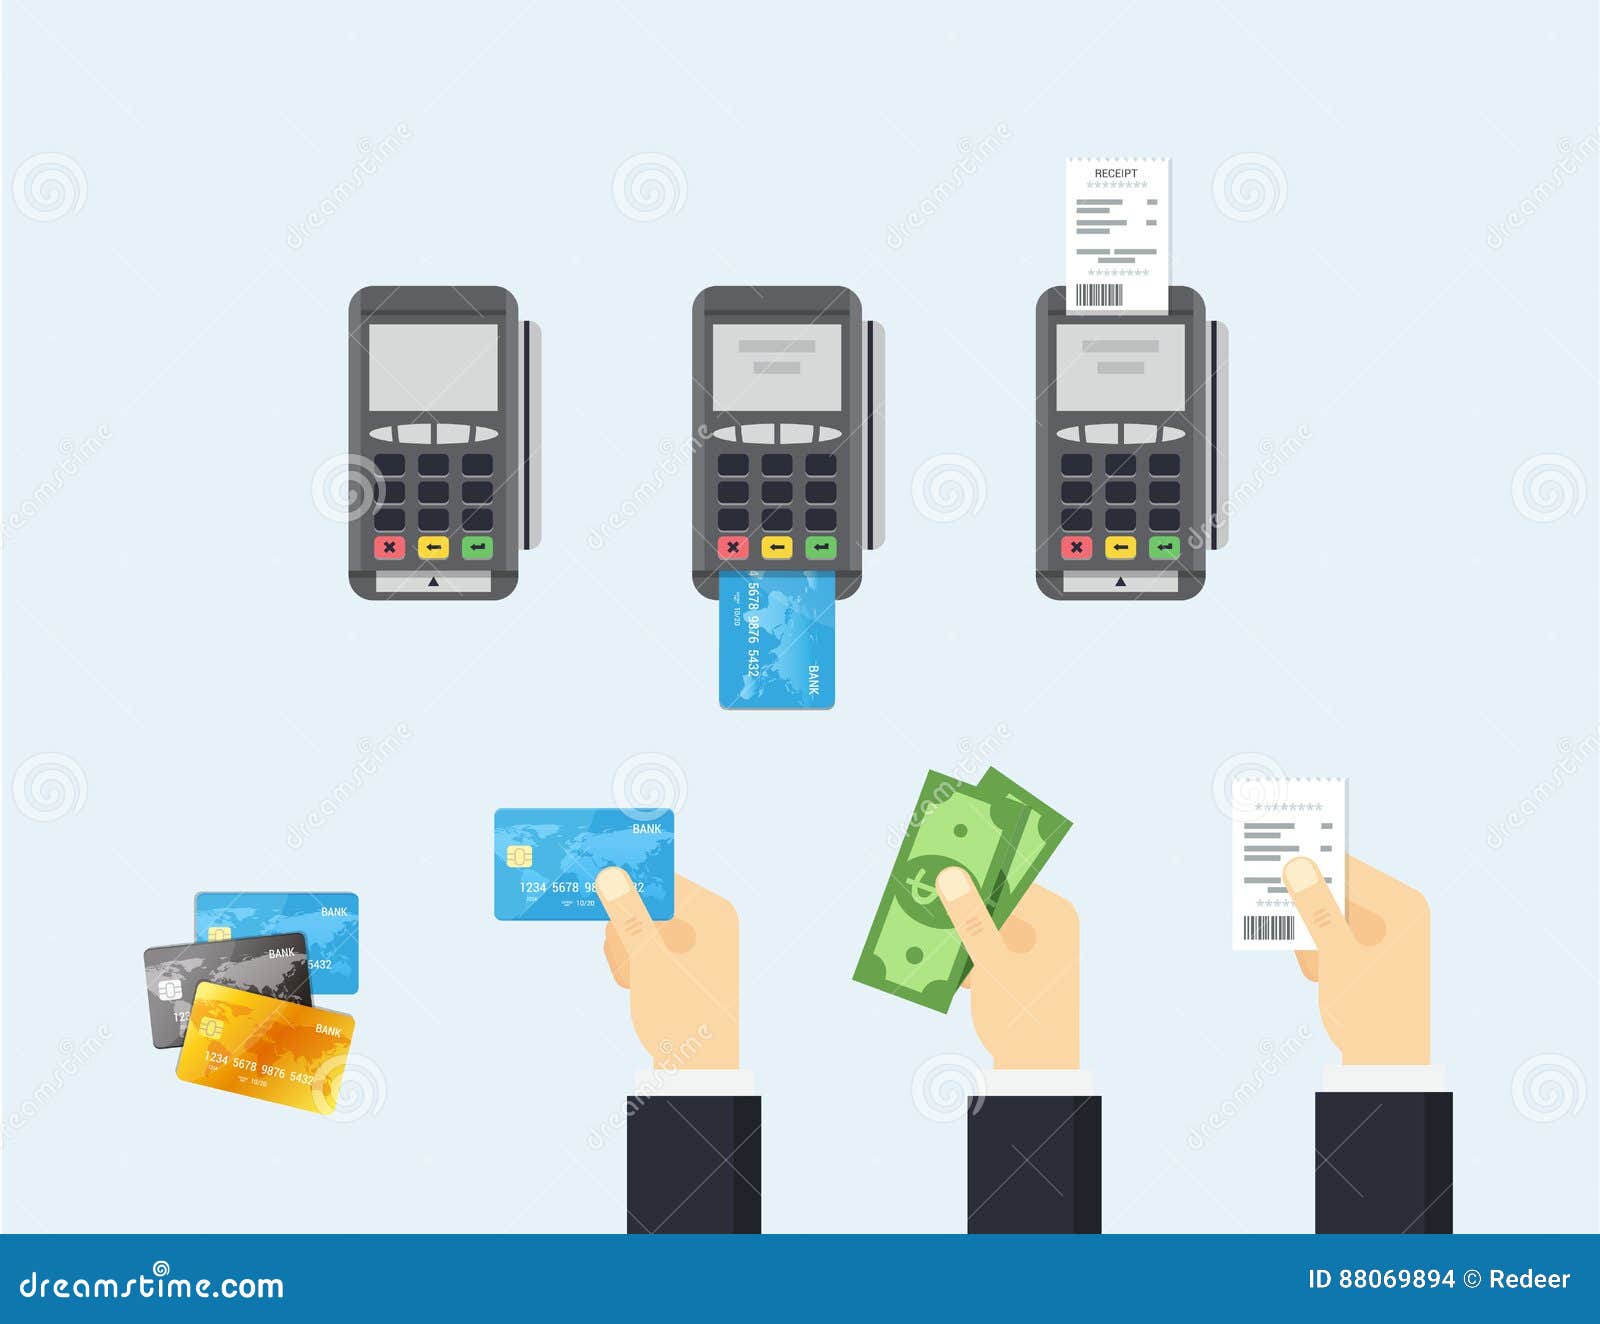 POS Terminal And Credit Card Processing Illustration In